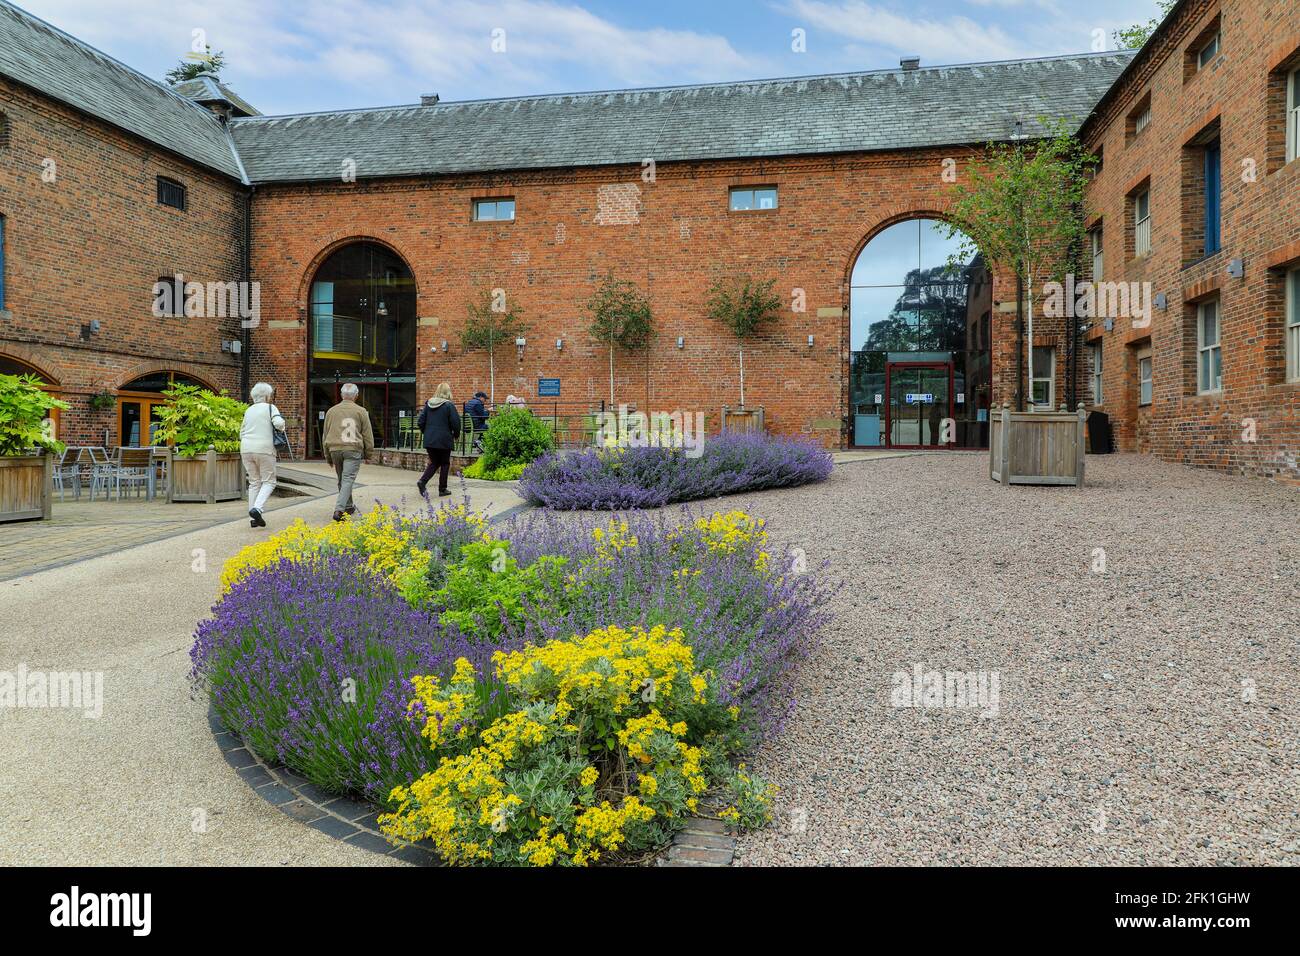 An old ex stable block converted to a restaurant and café, Weston Park, Weston-under-Lizard, near Shifnal, Staffordshire, England, UK. Stock Photo